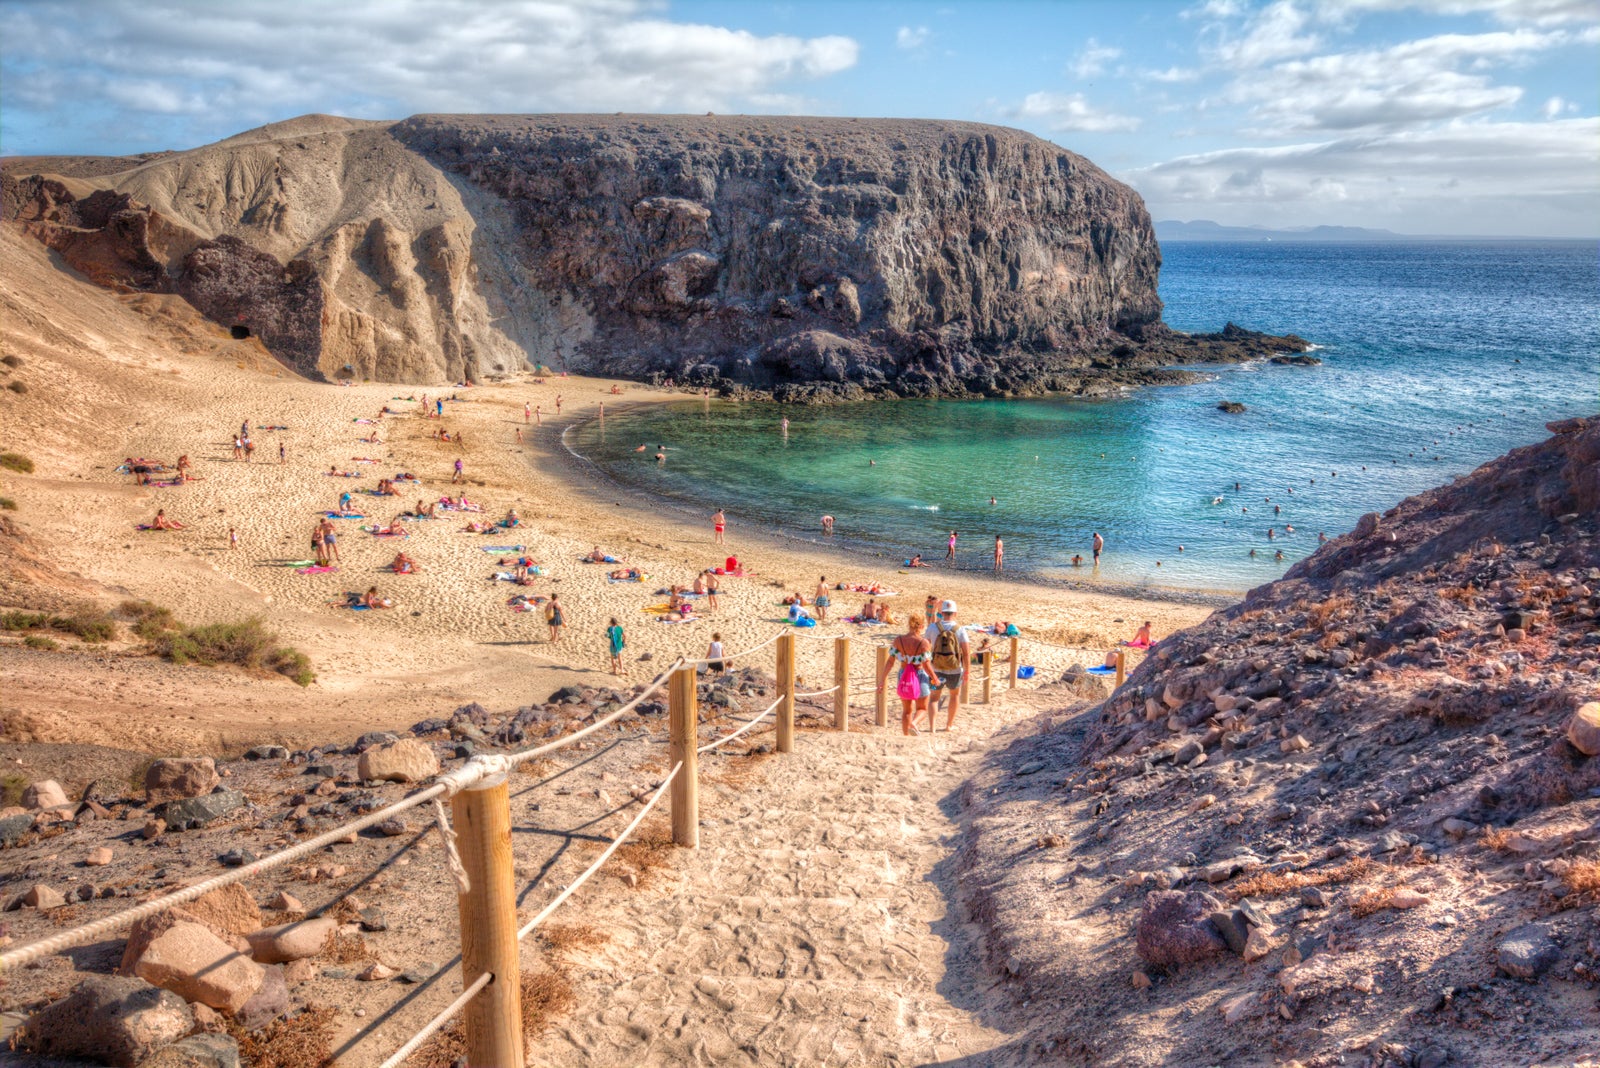 One of the beaches on the southern tip of the island of Lanzarote